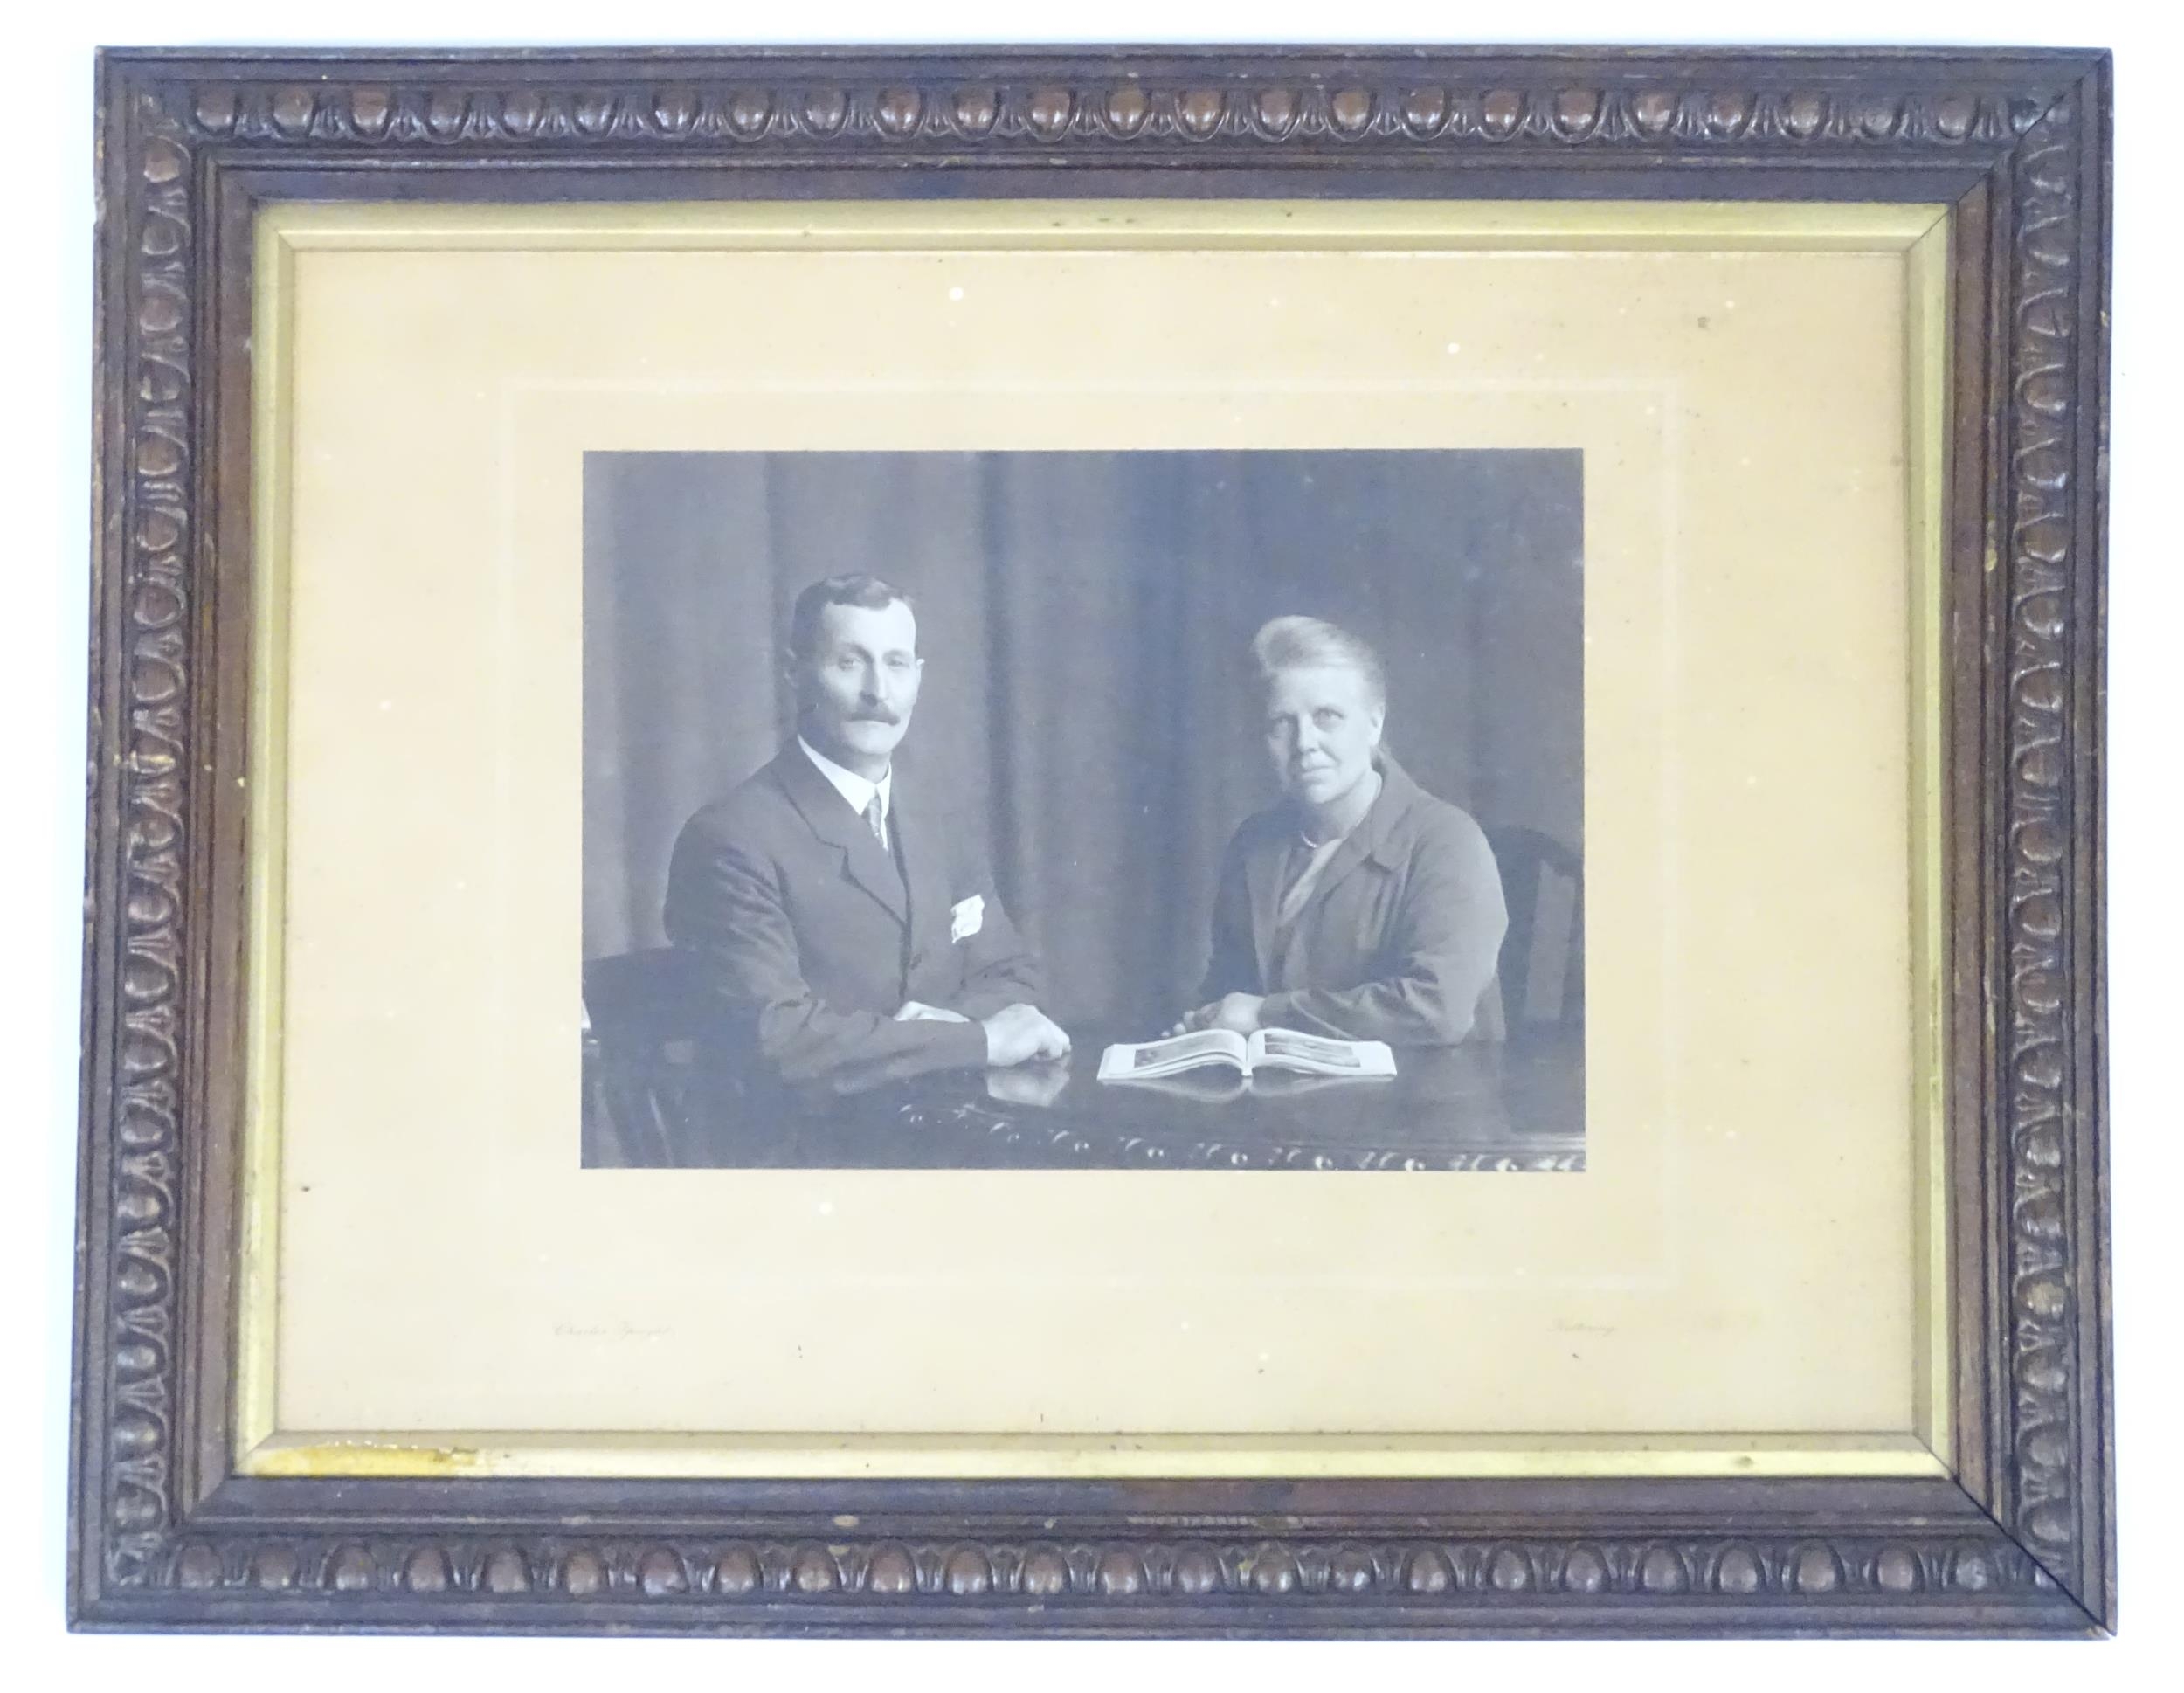 An early 20thC monochrome photograph depicting a man and a woman seated at a table with an open